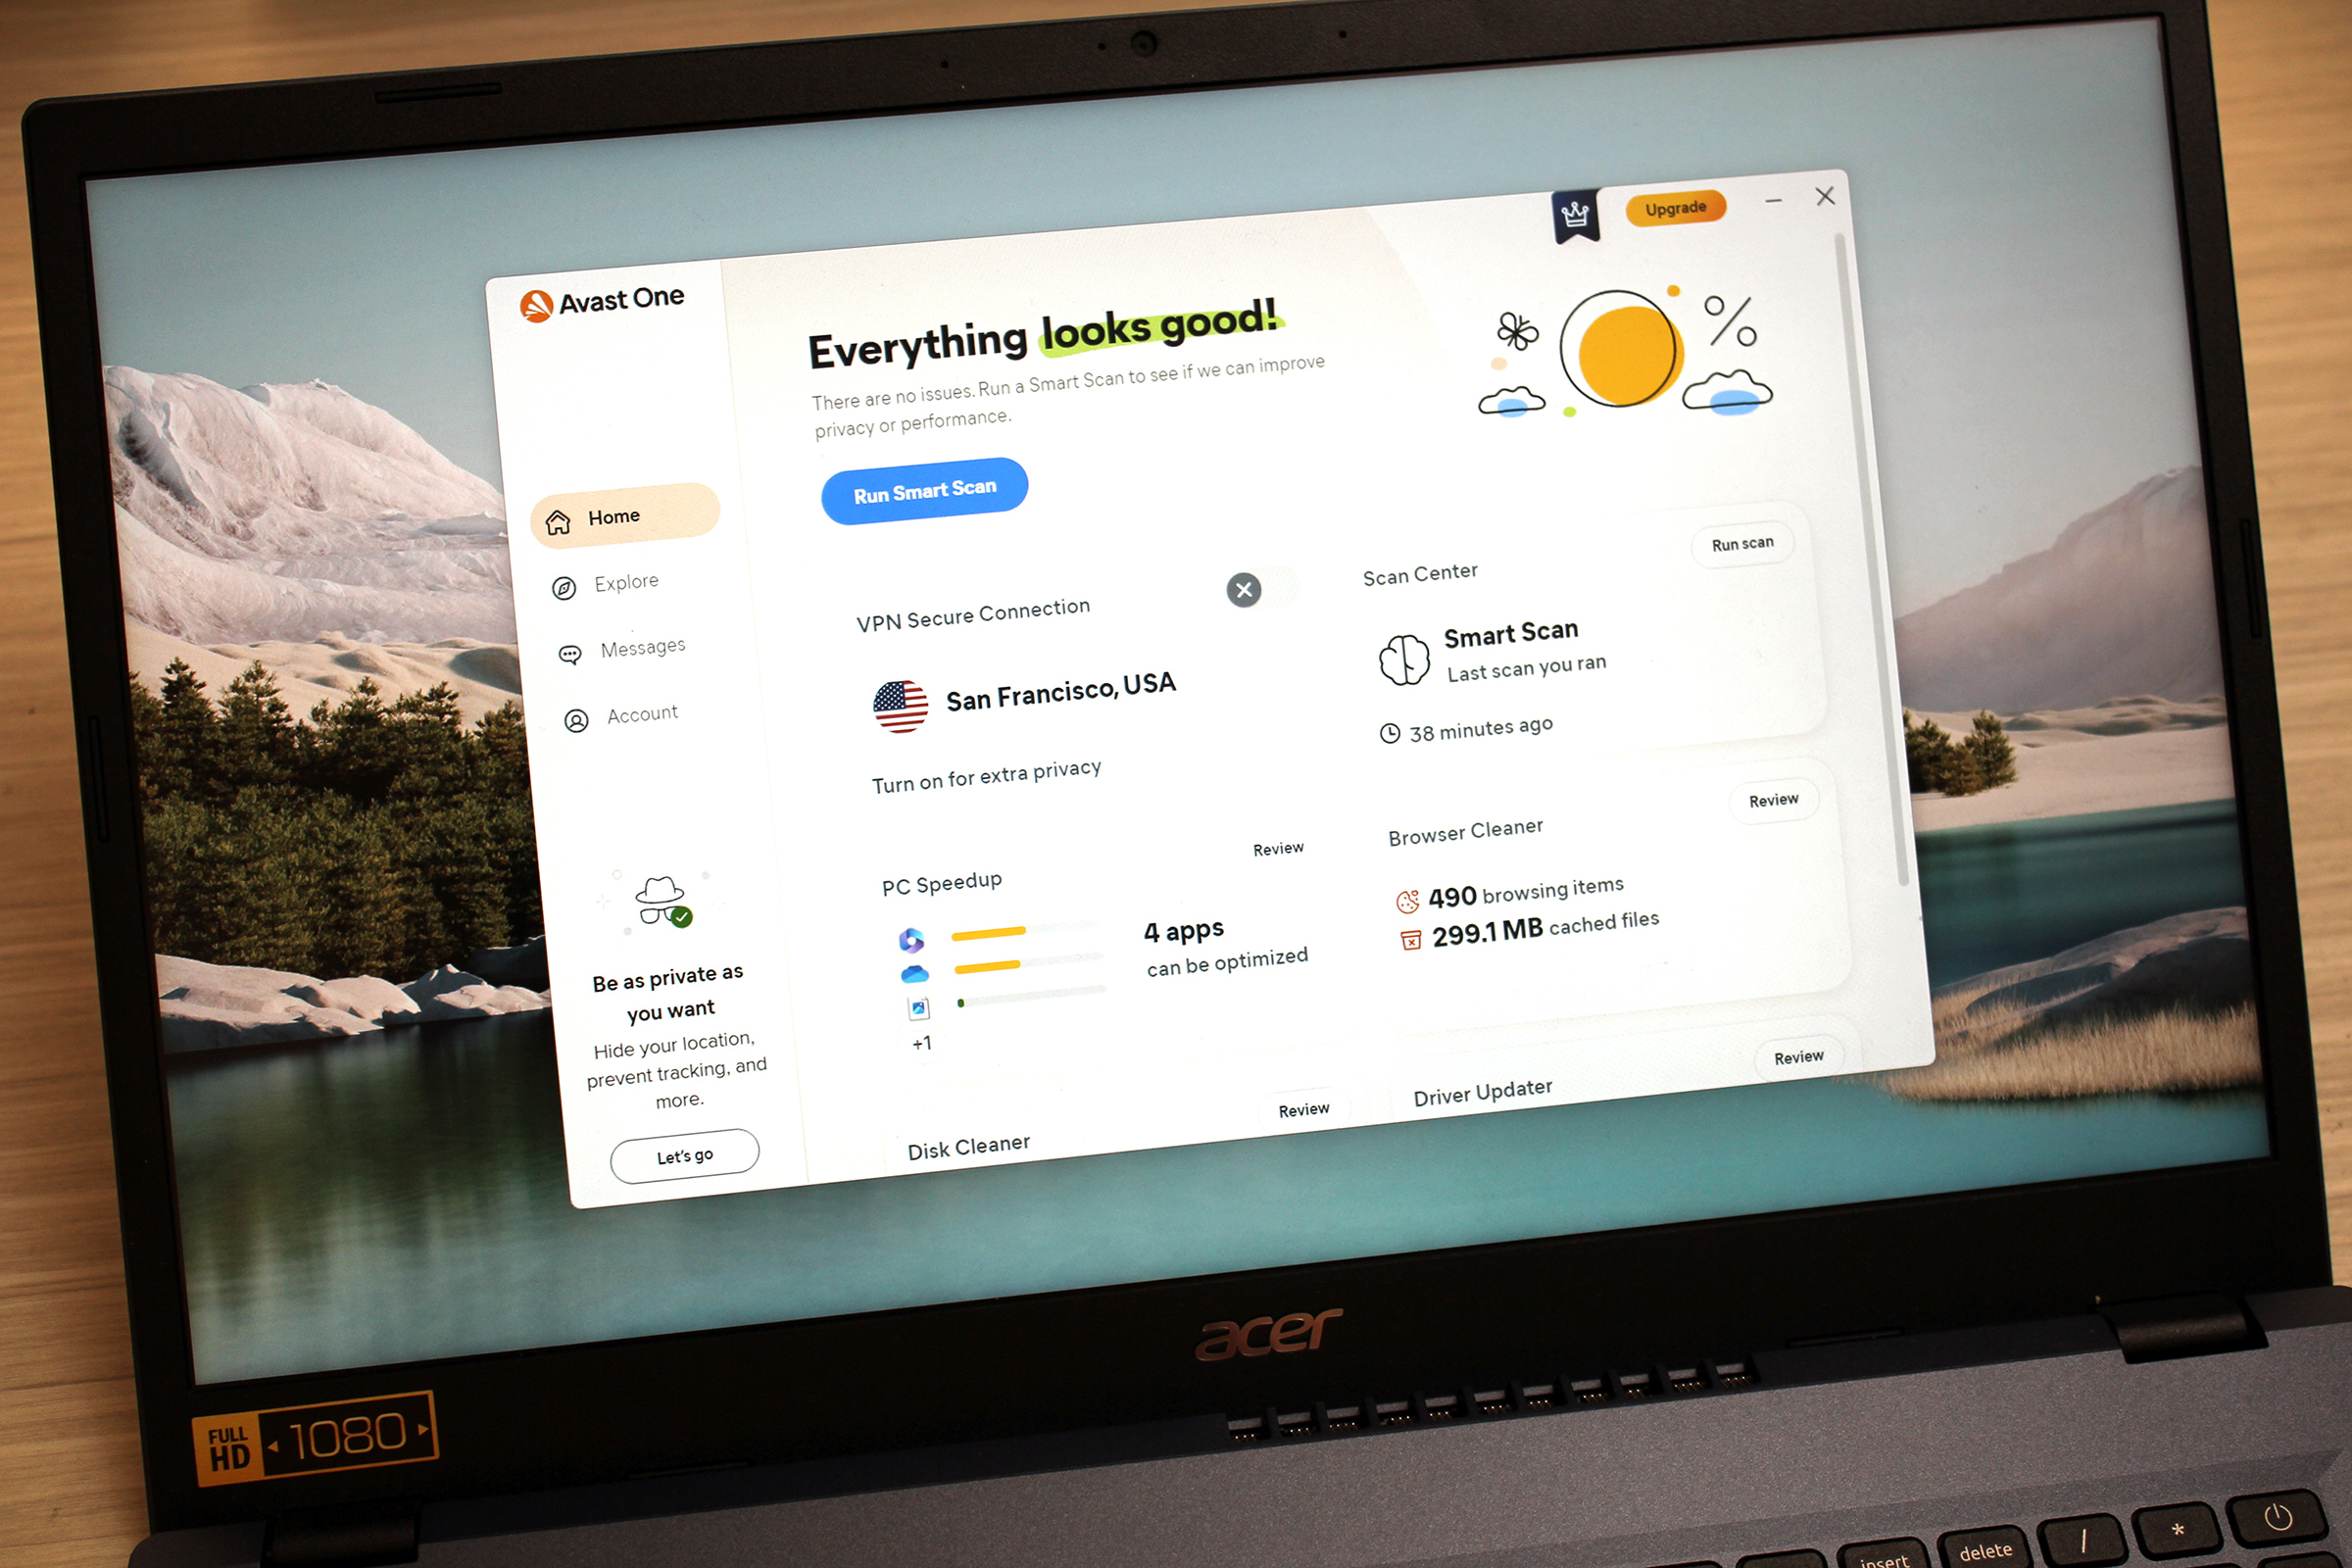 Avast One open to its dashboard view on an Acer laptop